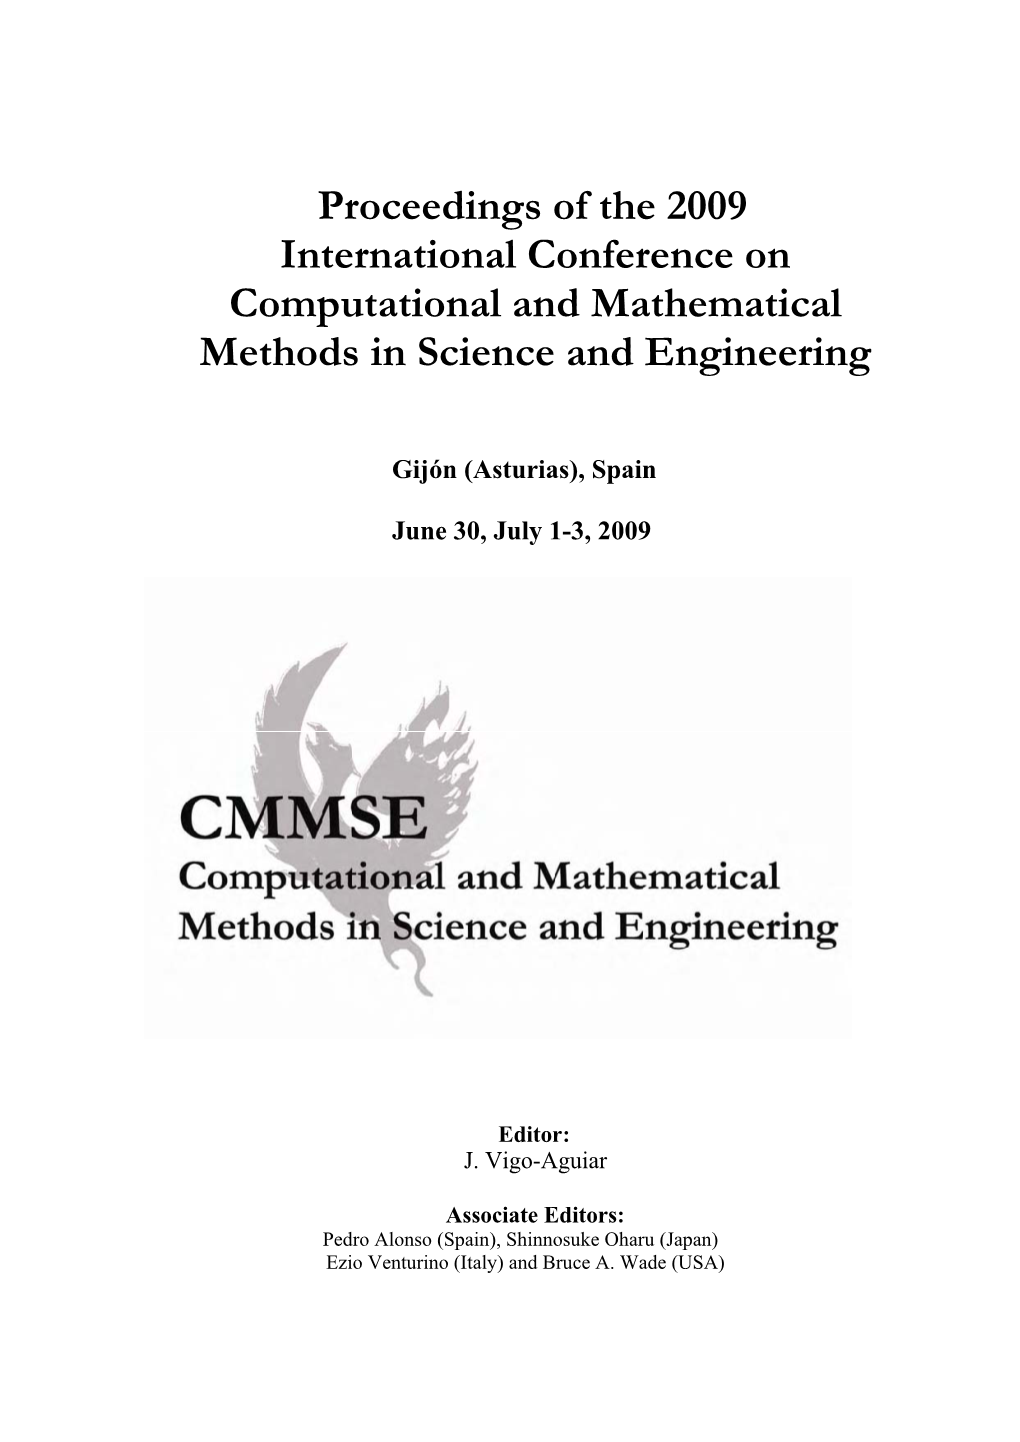 Proceedings of the 2009 International Conference on Computational and Mathematical Methods in Science and Engineering